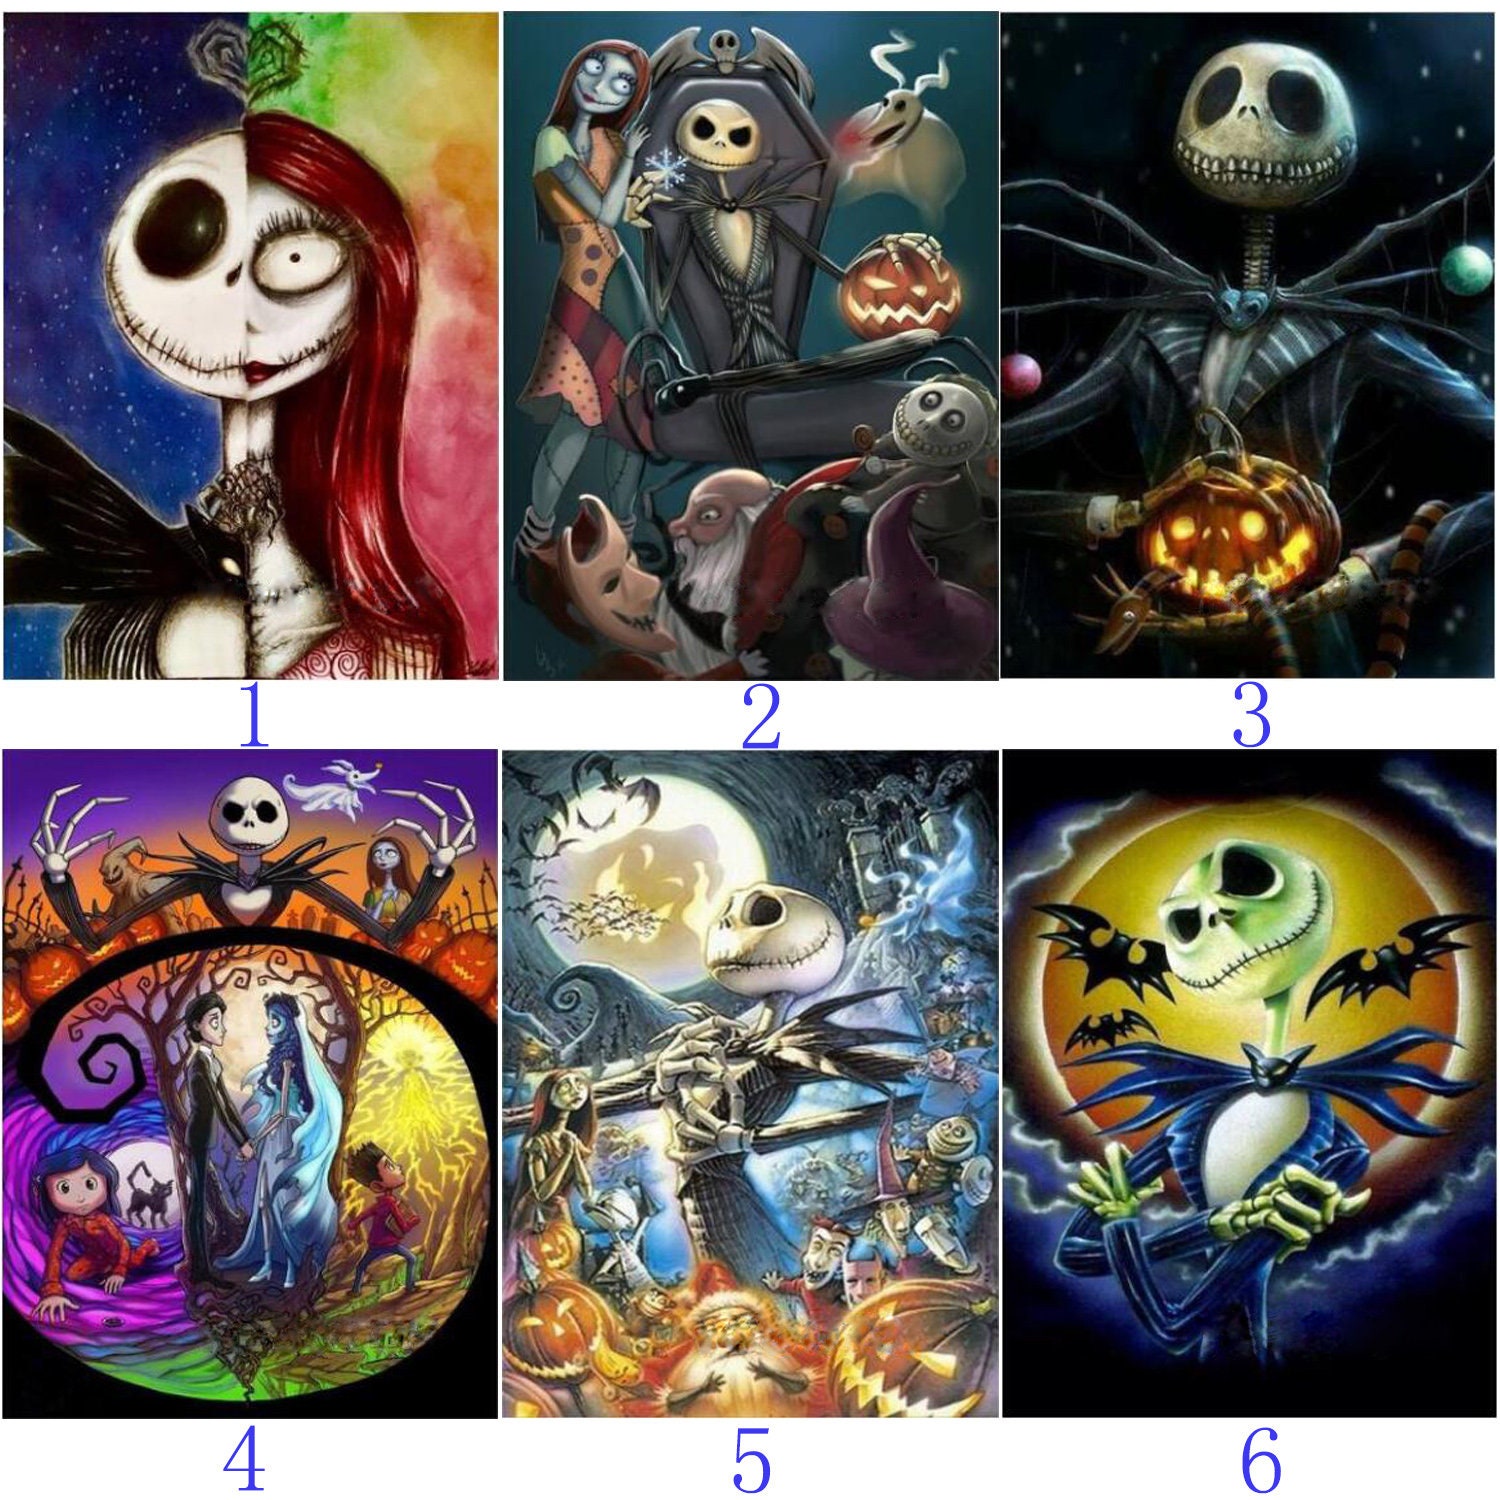 Getting in the Halloween spirit with this Nightmare Before Christmas DP! :  r/diamondpainting